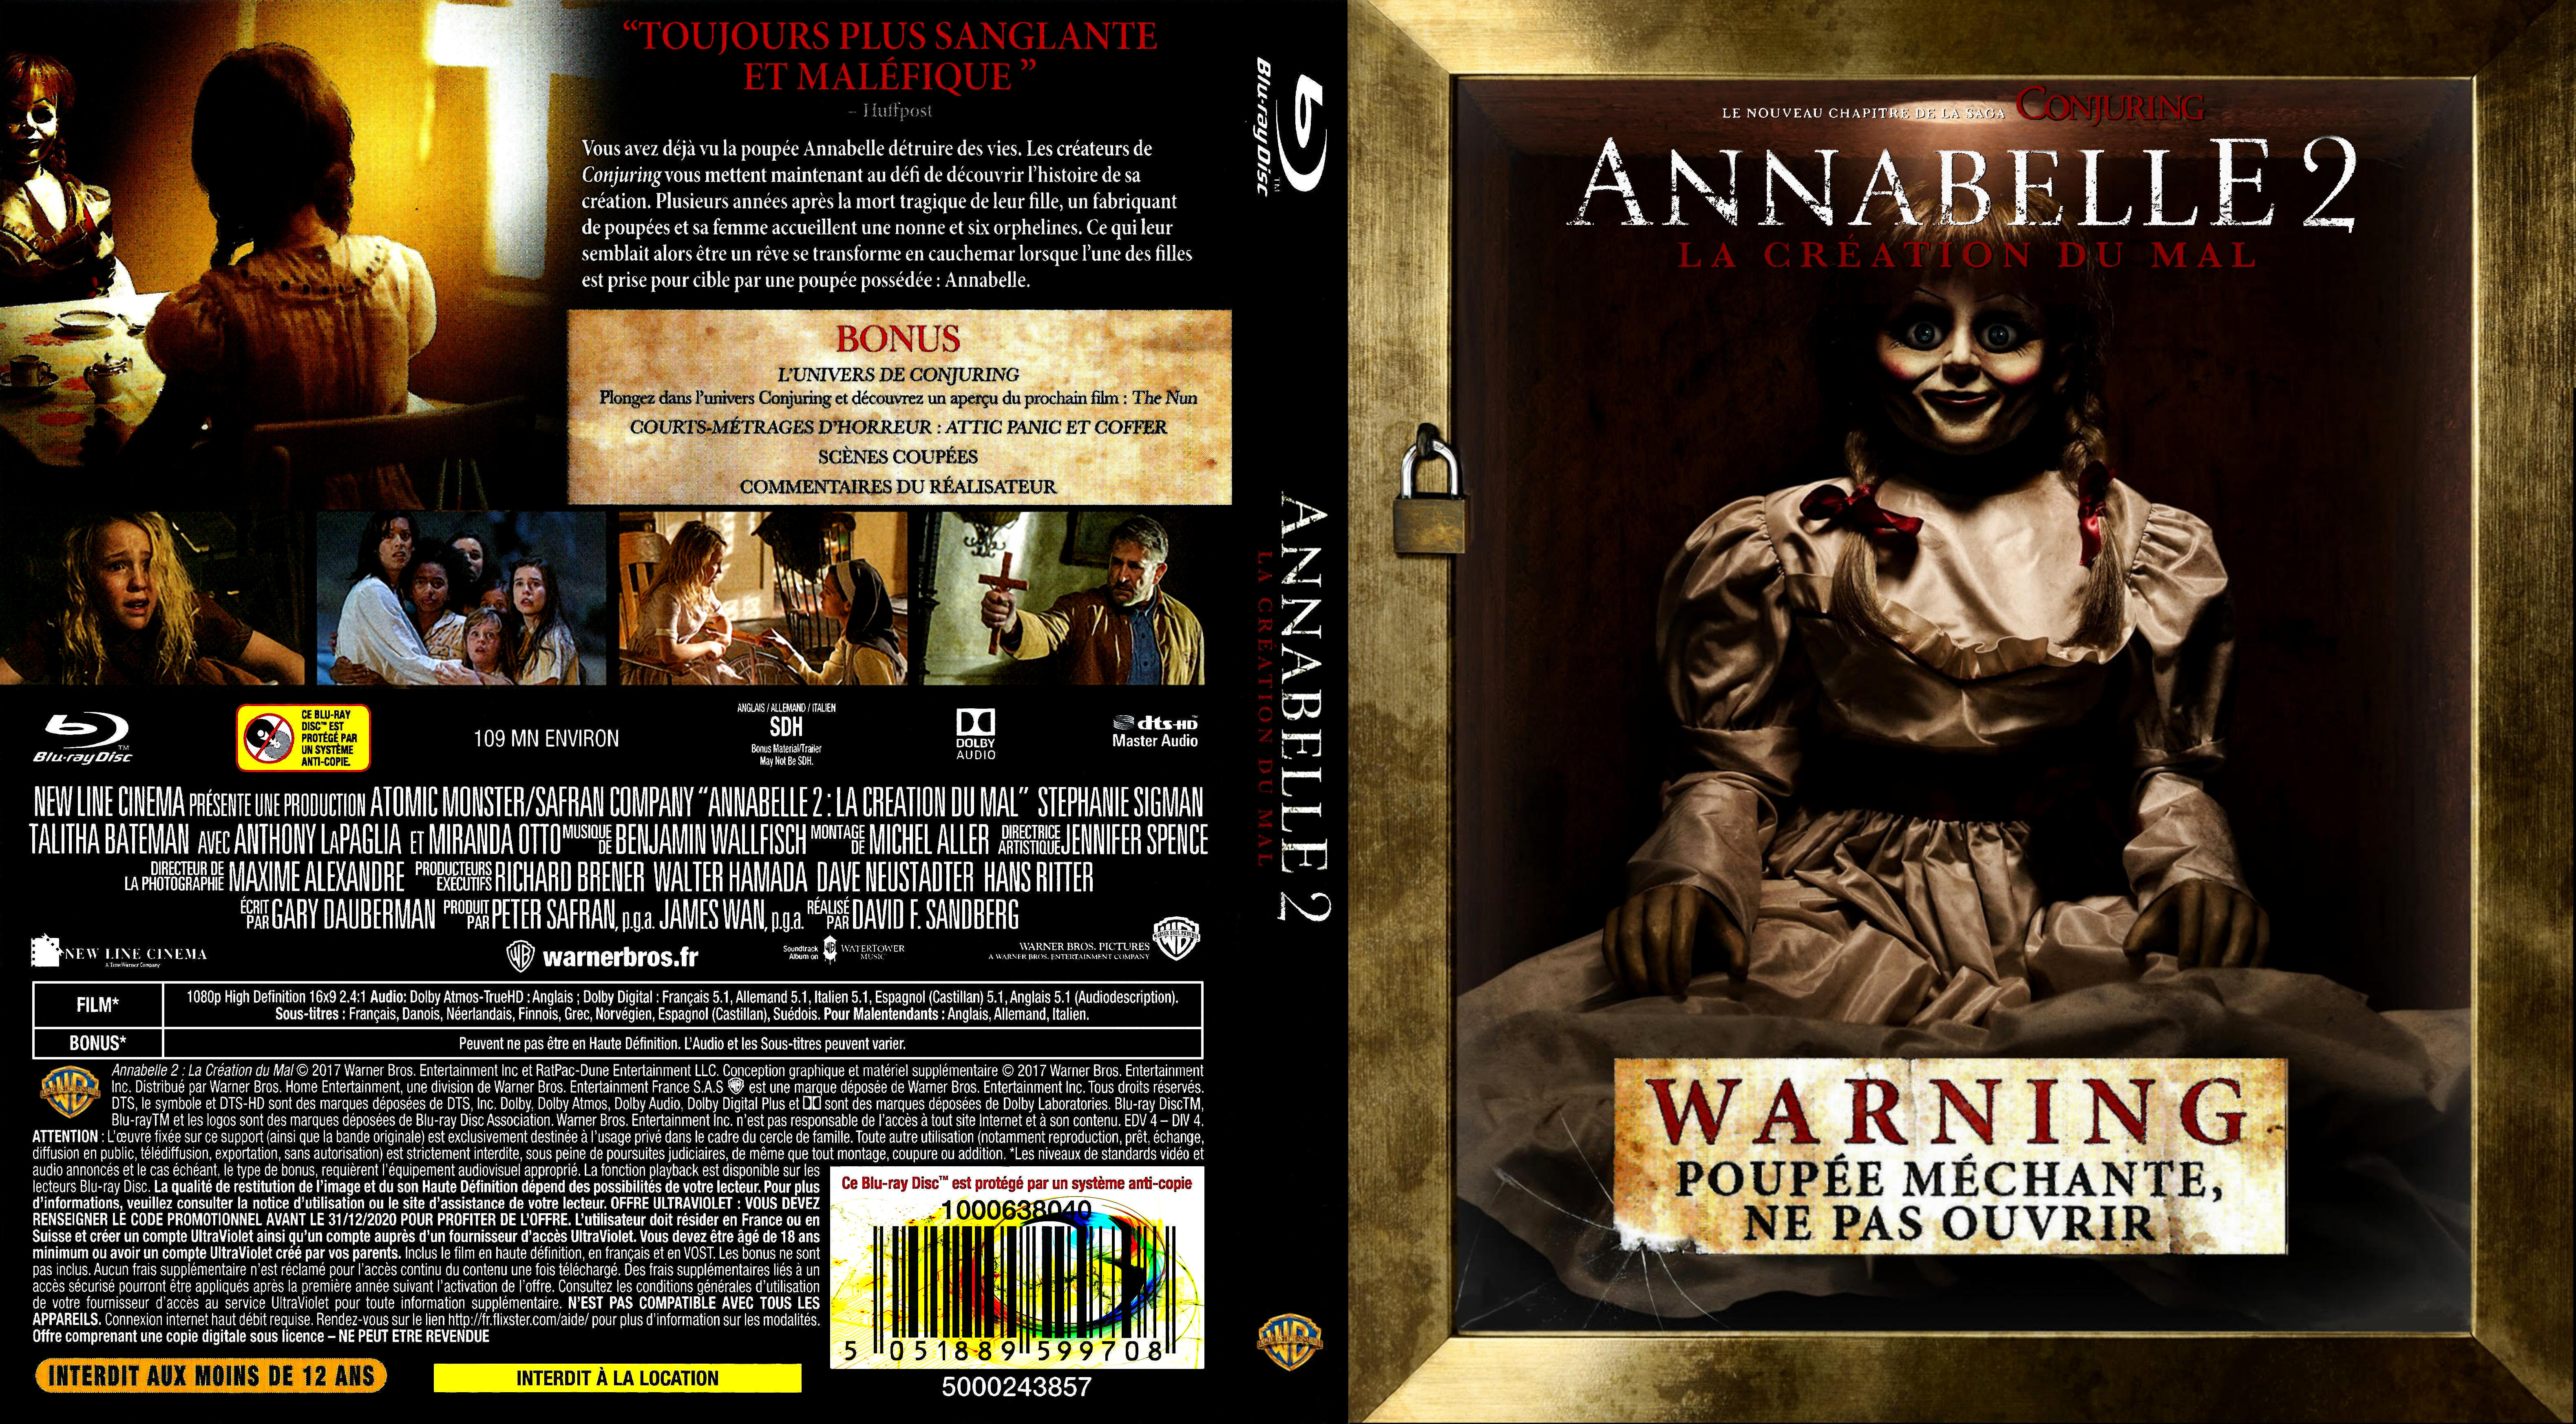 Jaquette DVD Annabelle 2 (BLU-RAY)